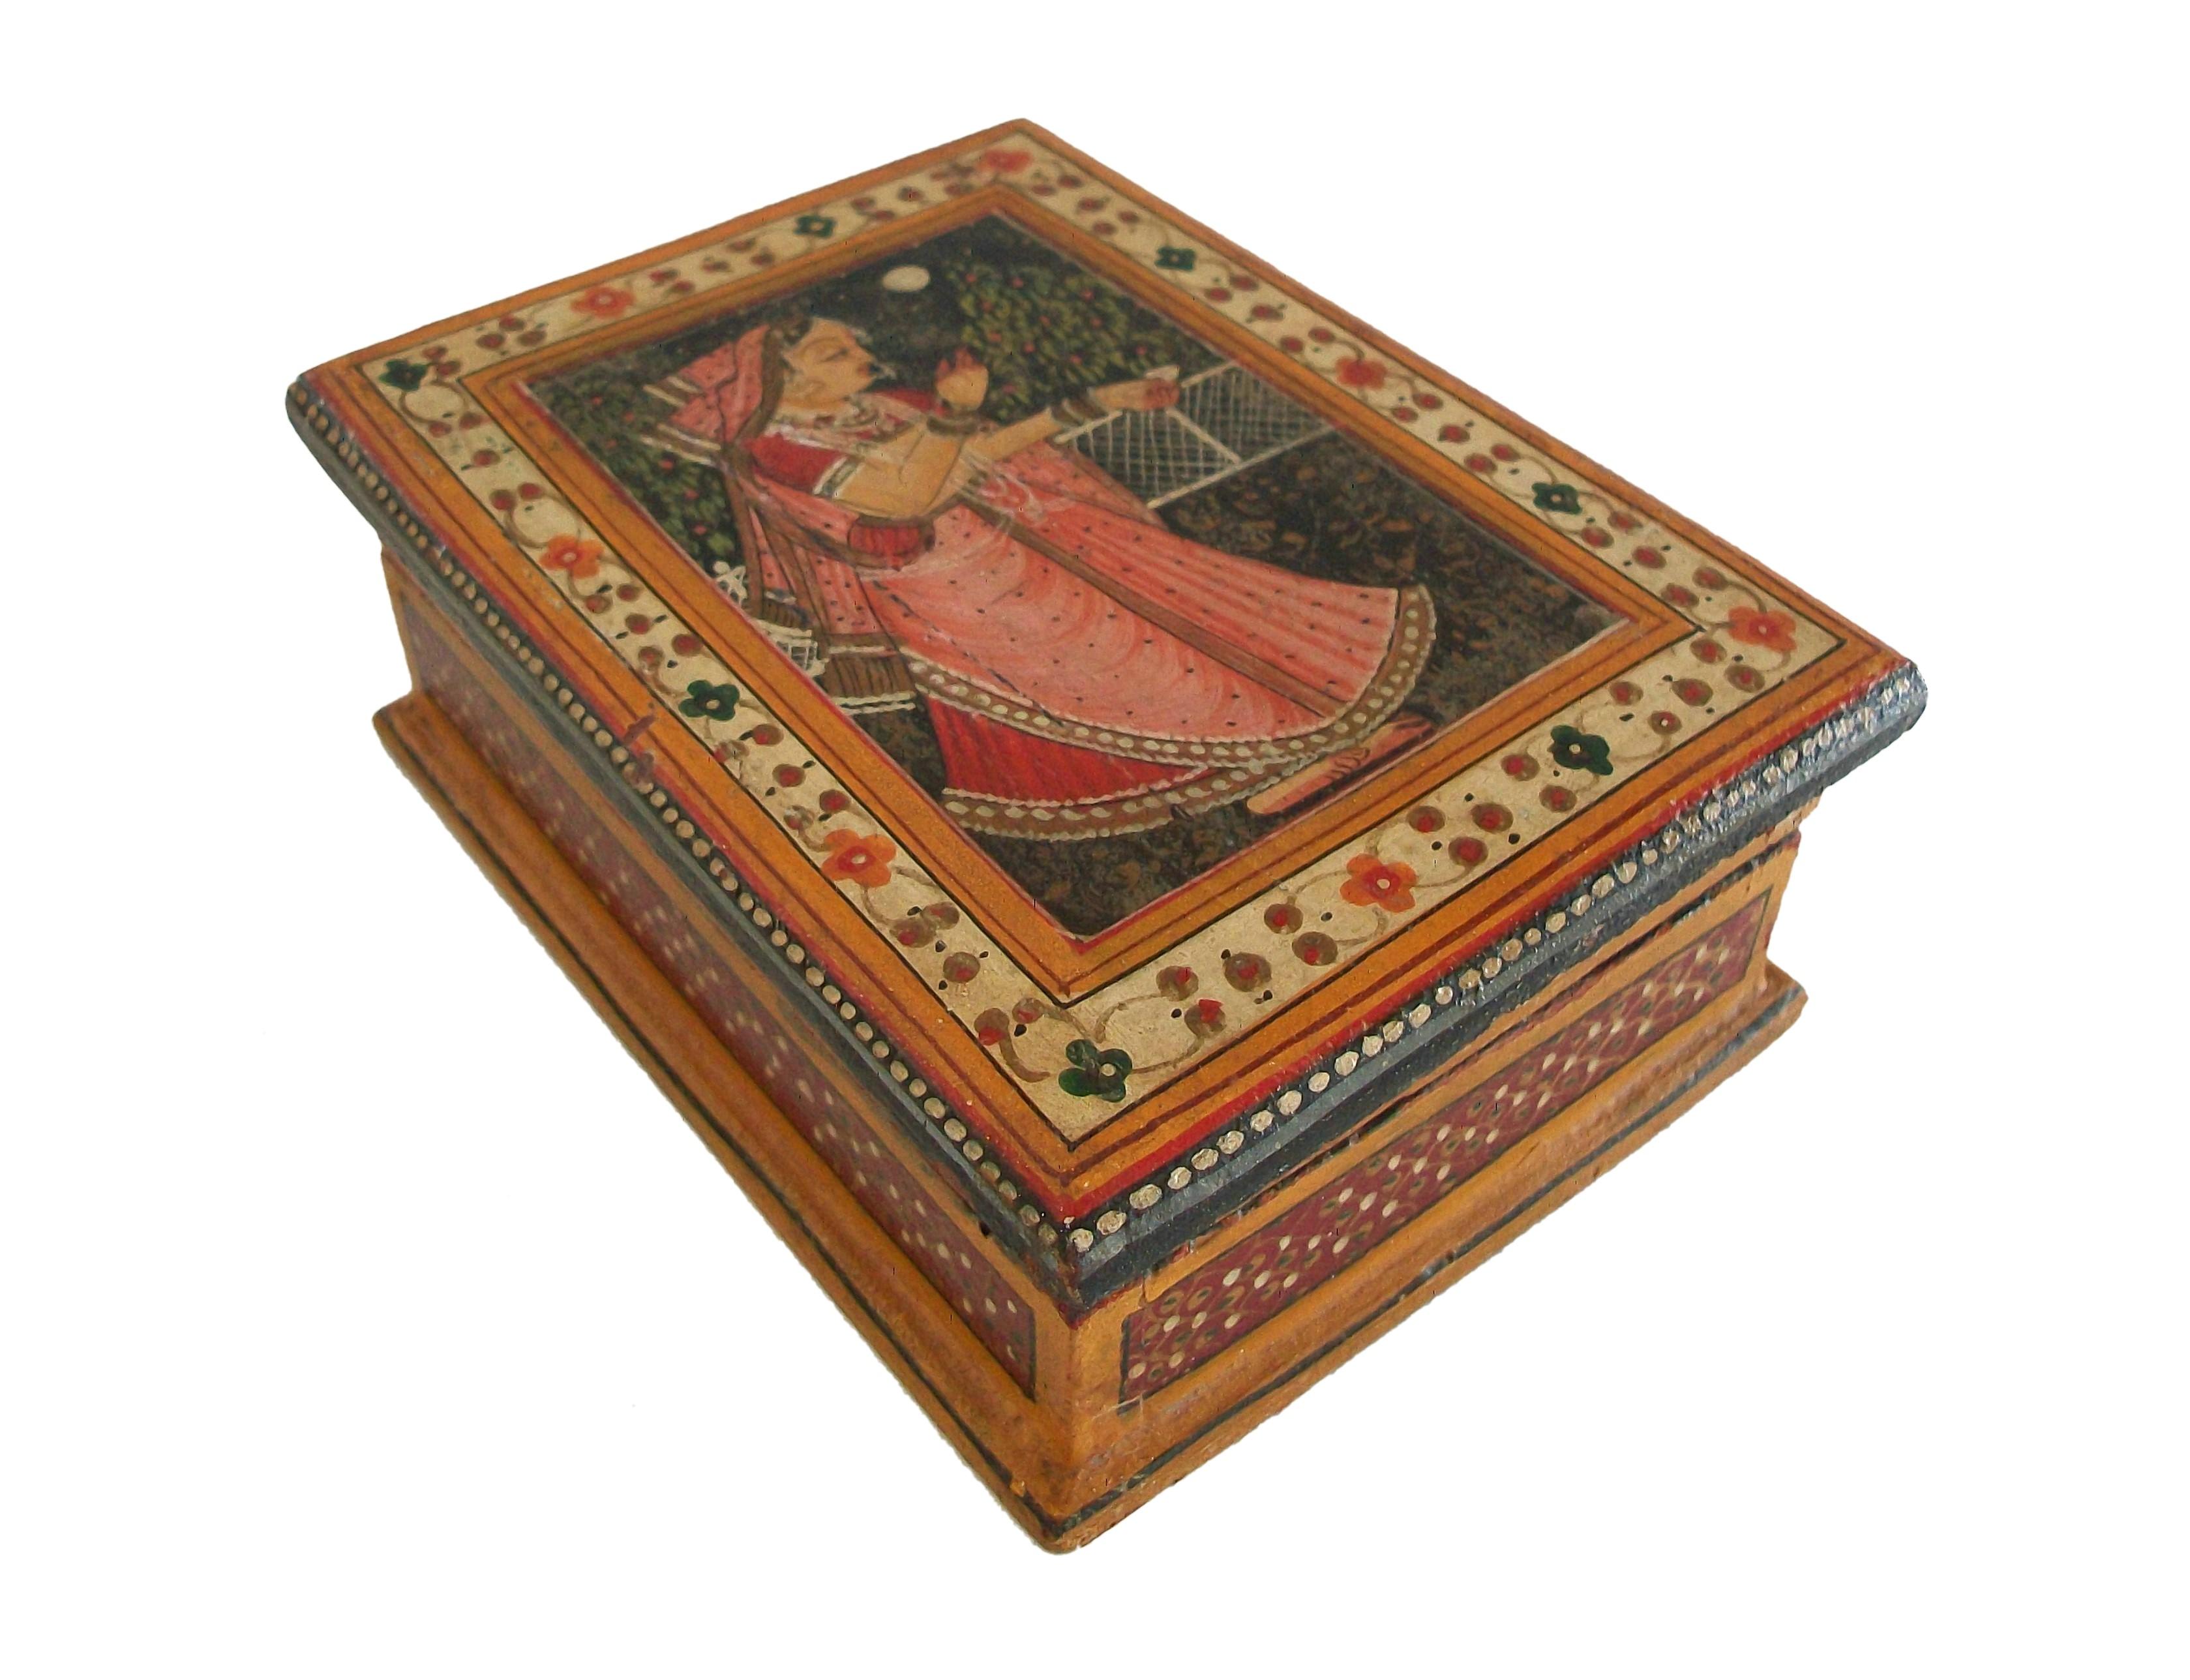 Vintage South Asian hand painted wooden box with removeable lid - featuring a full length portrait of an Indian woman in a pink sari to the lid of the box surrounded by a floral border - intricately patterned / painted sides - original paper label